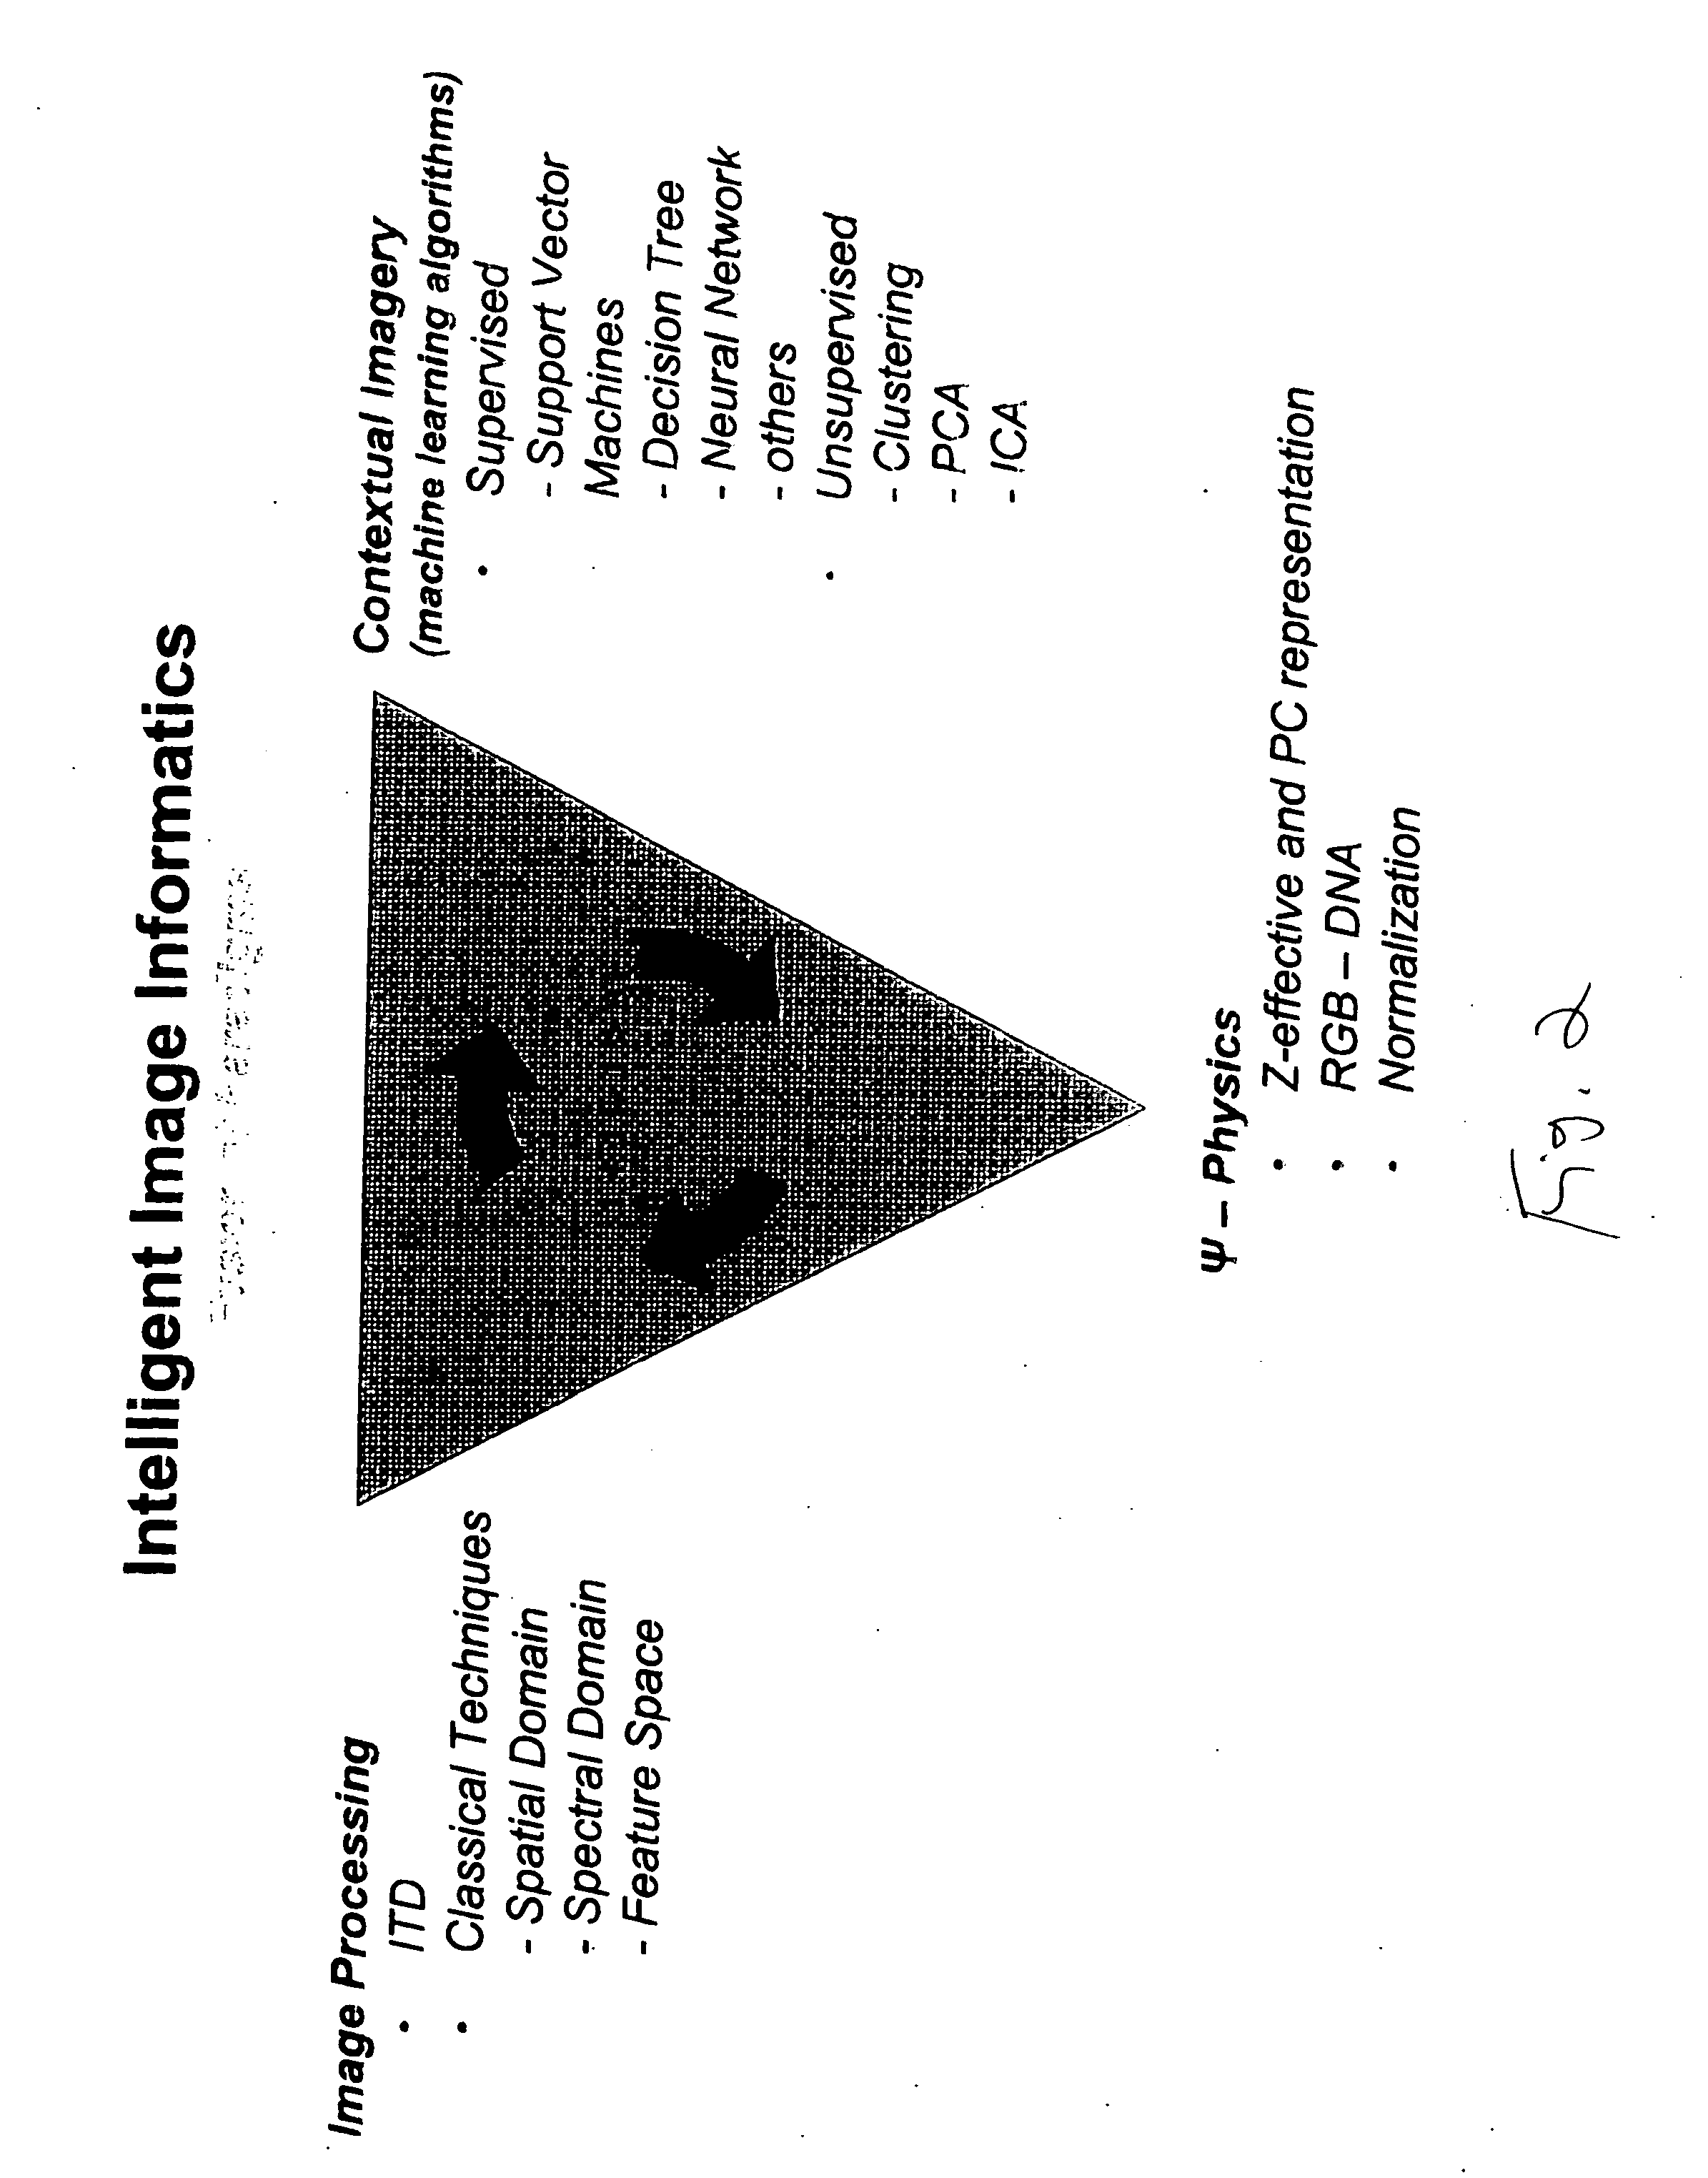 System and method for identifying objects of interest in image data